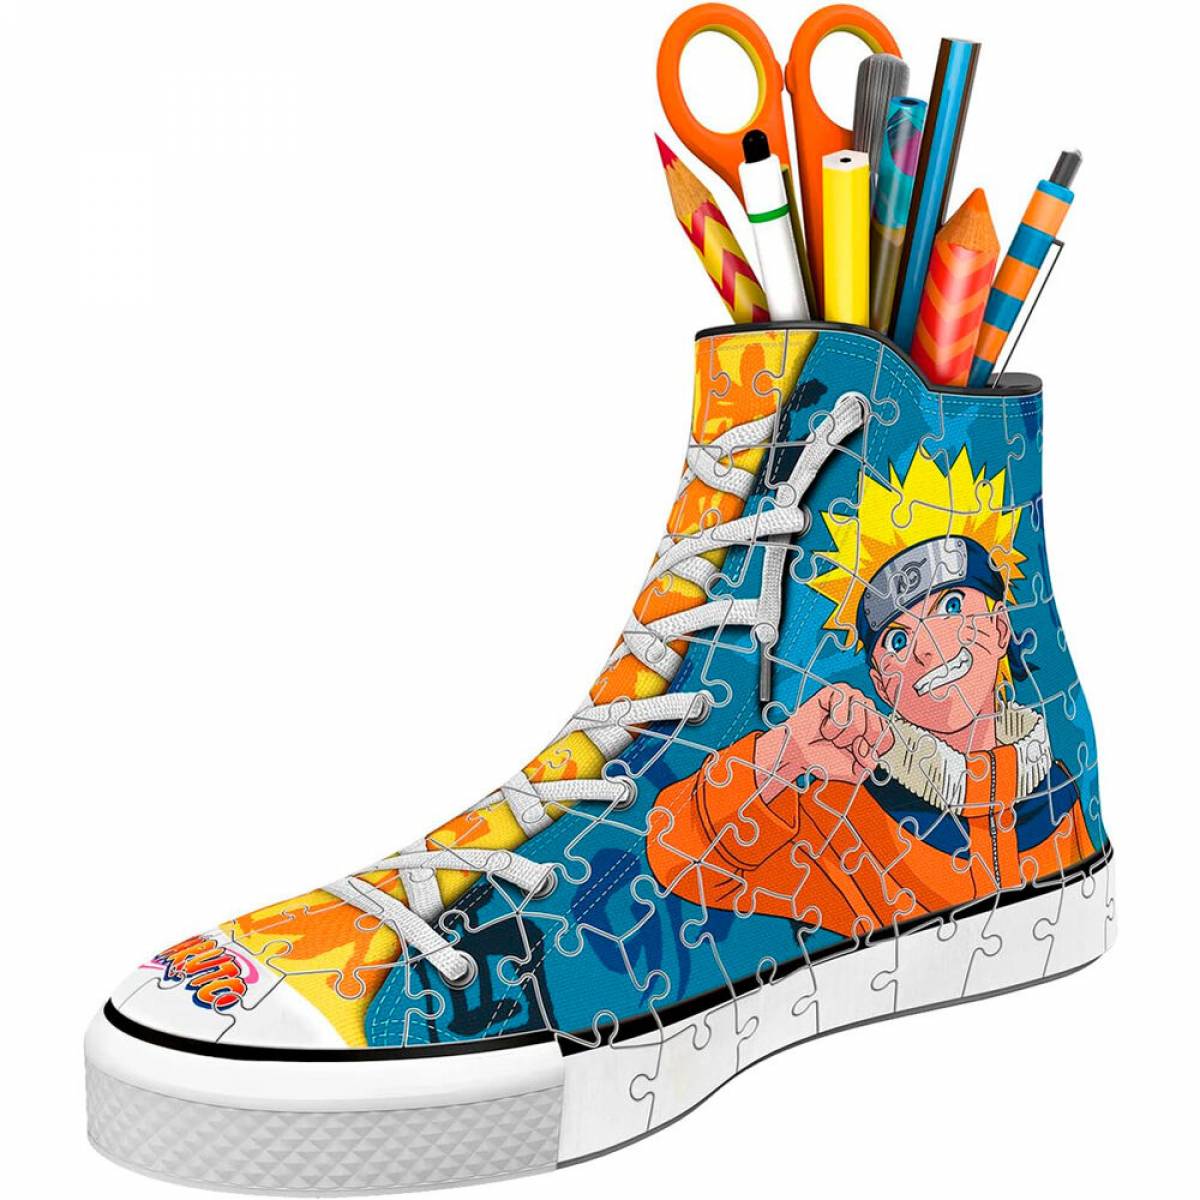 Puzzle 3D Sneaker Naruto Shippuden 112 piese